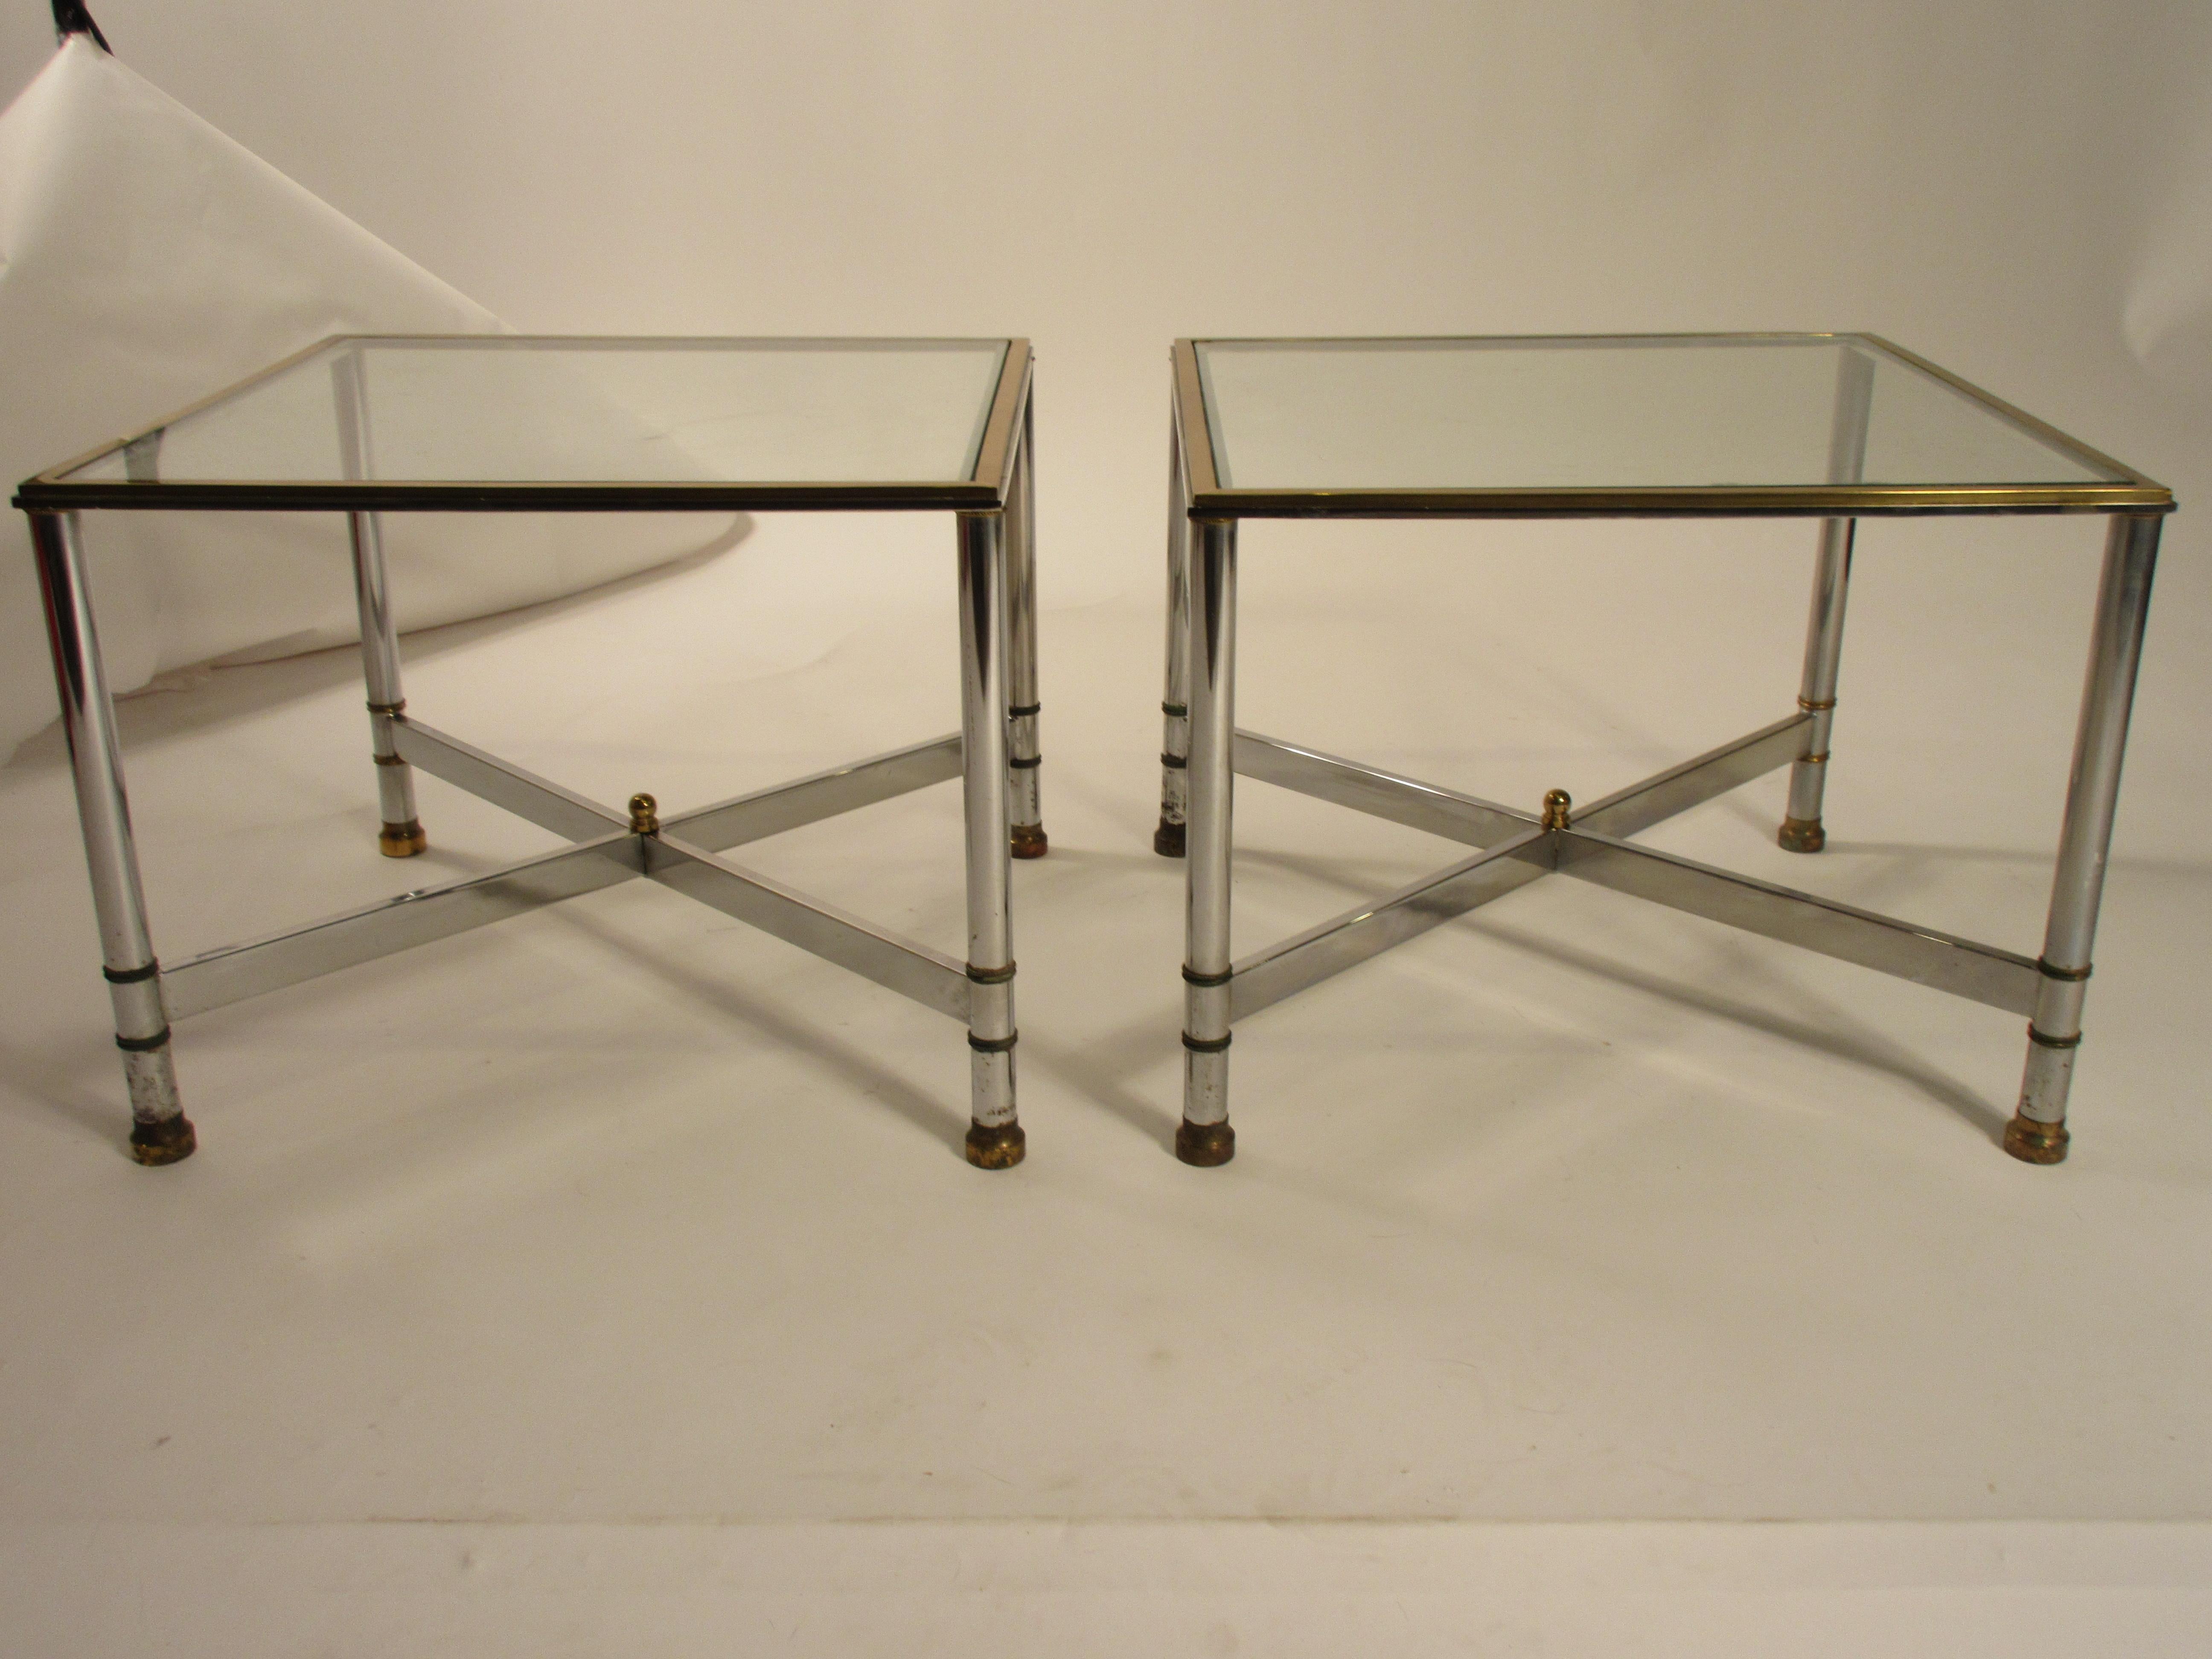 Pair of 1980s chrome side tables with brass accents.